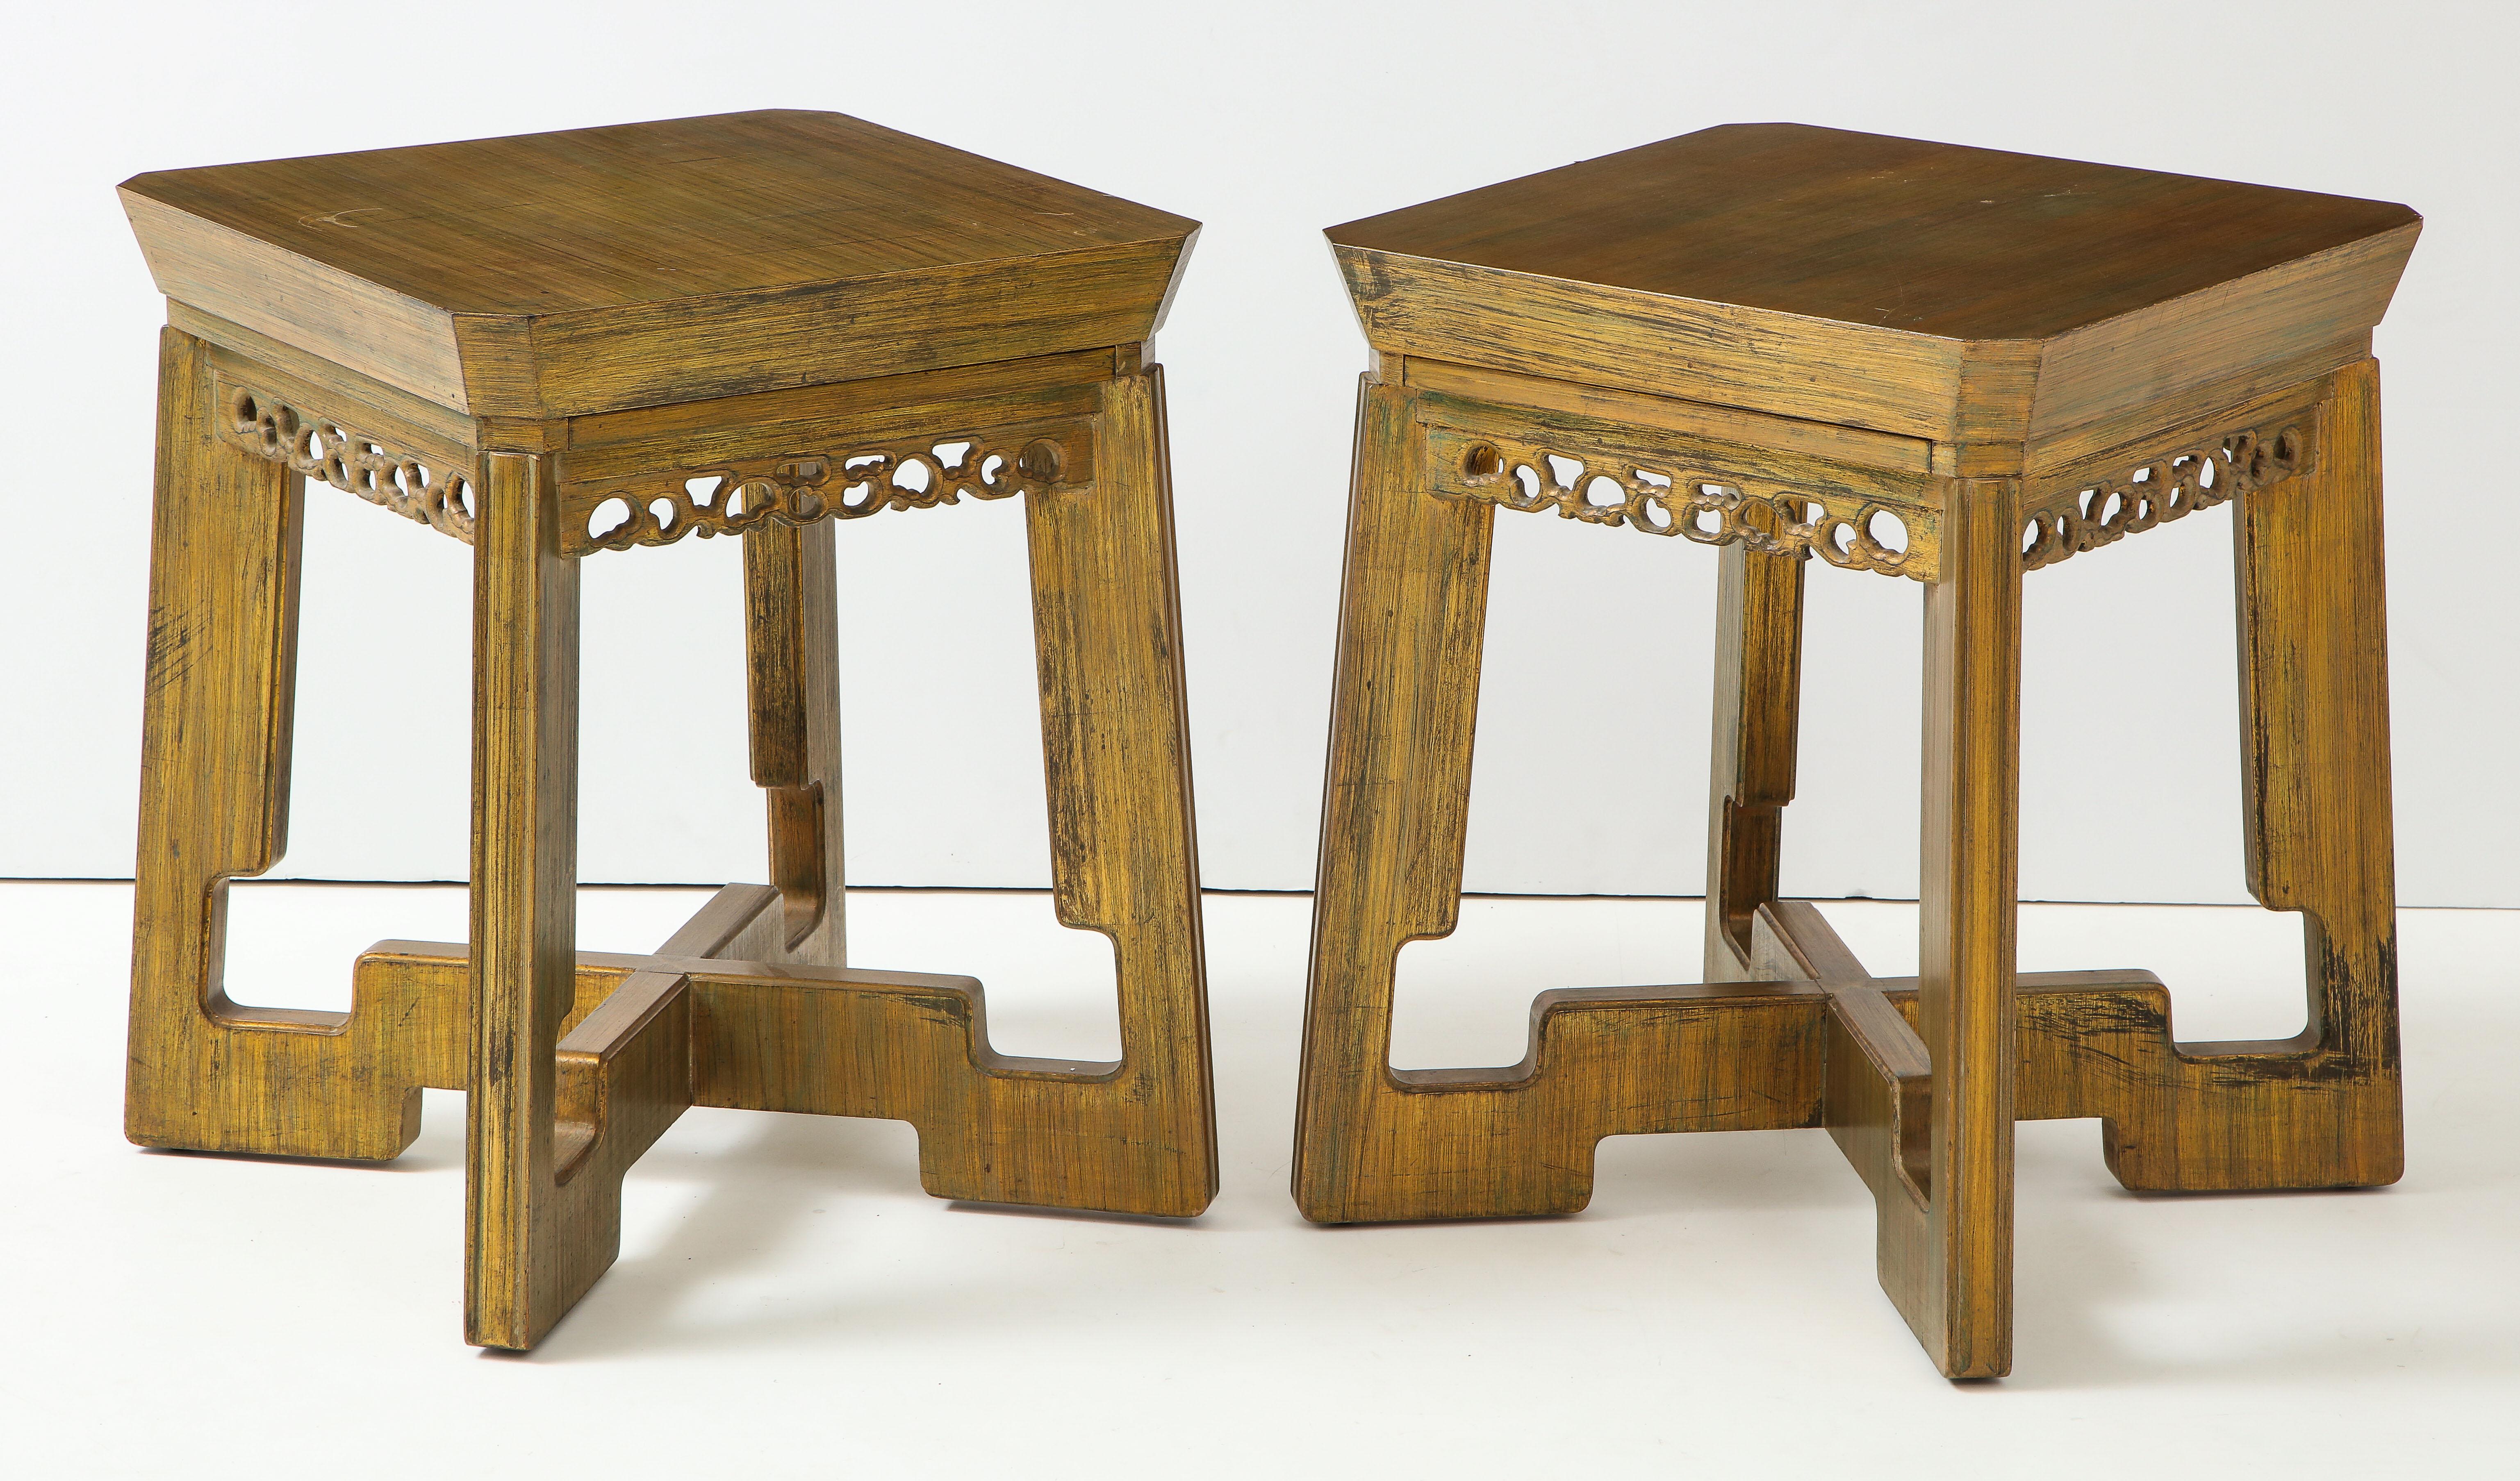 Pair of custom Asian influenced side tables / nightstands by James Mont.
The tables each have a pullout tray top and retain there original combed gilded finish which is in great condition.
They are branded James Mont Design.
  